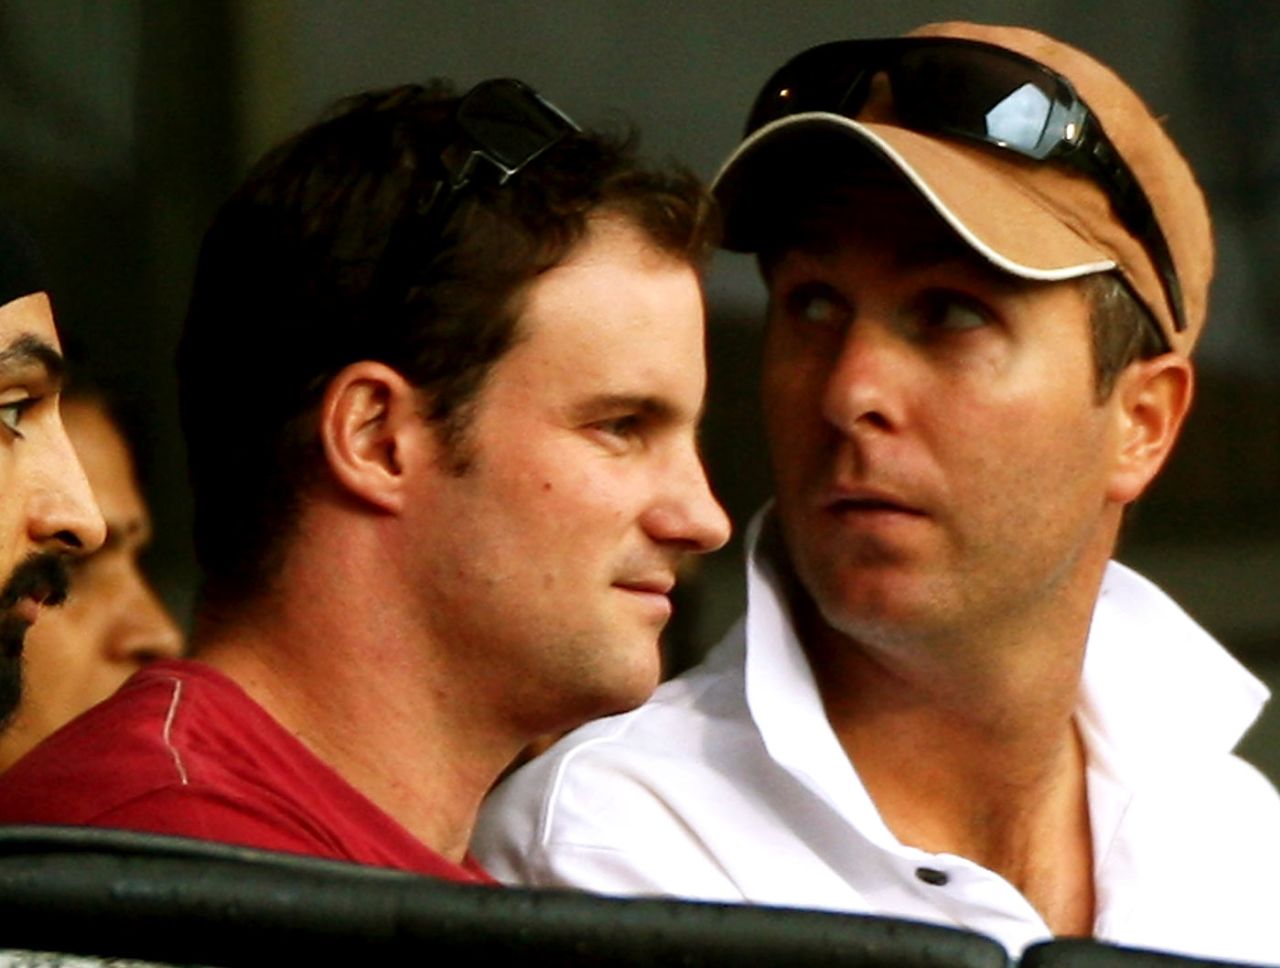 Andrew Strauss and Michael Vaughan watch the action at Bangalore, India v England, 4th ODI, Bangalore, November 23, 2008